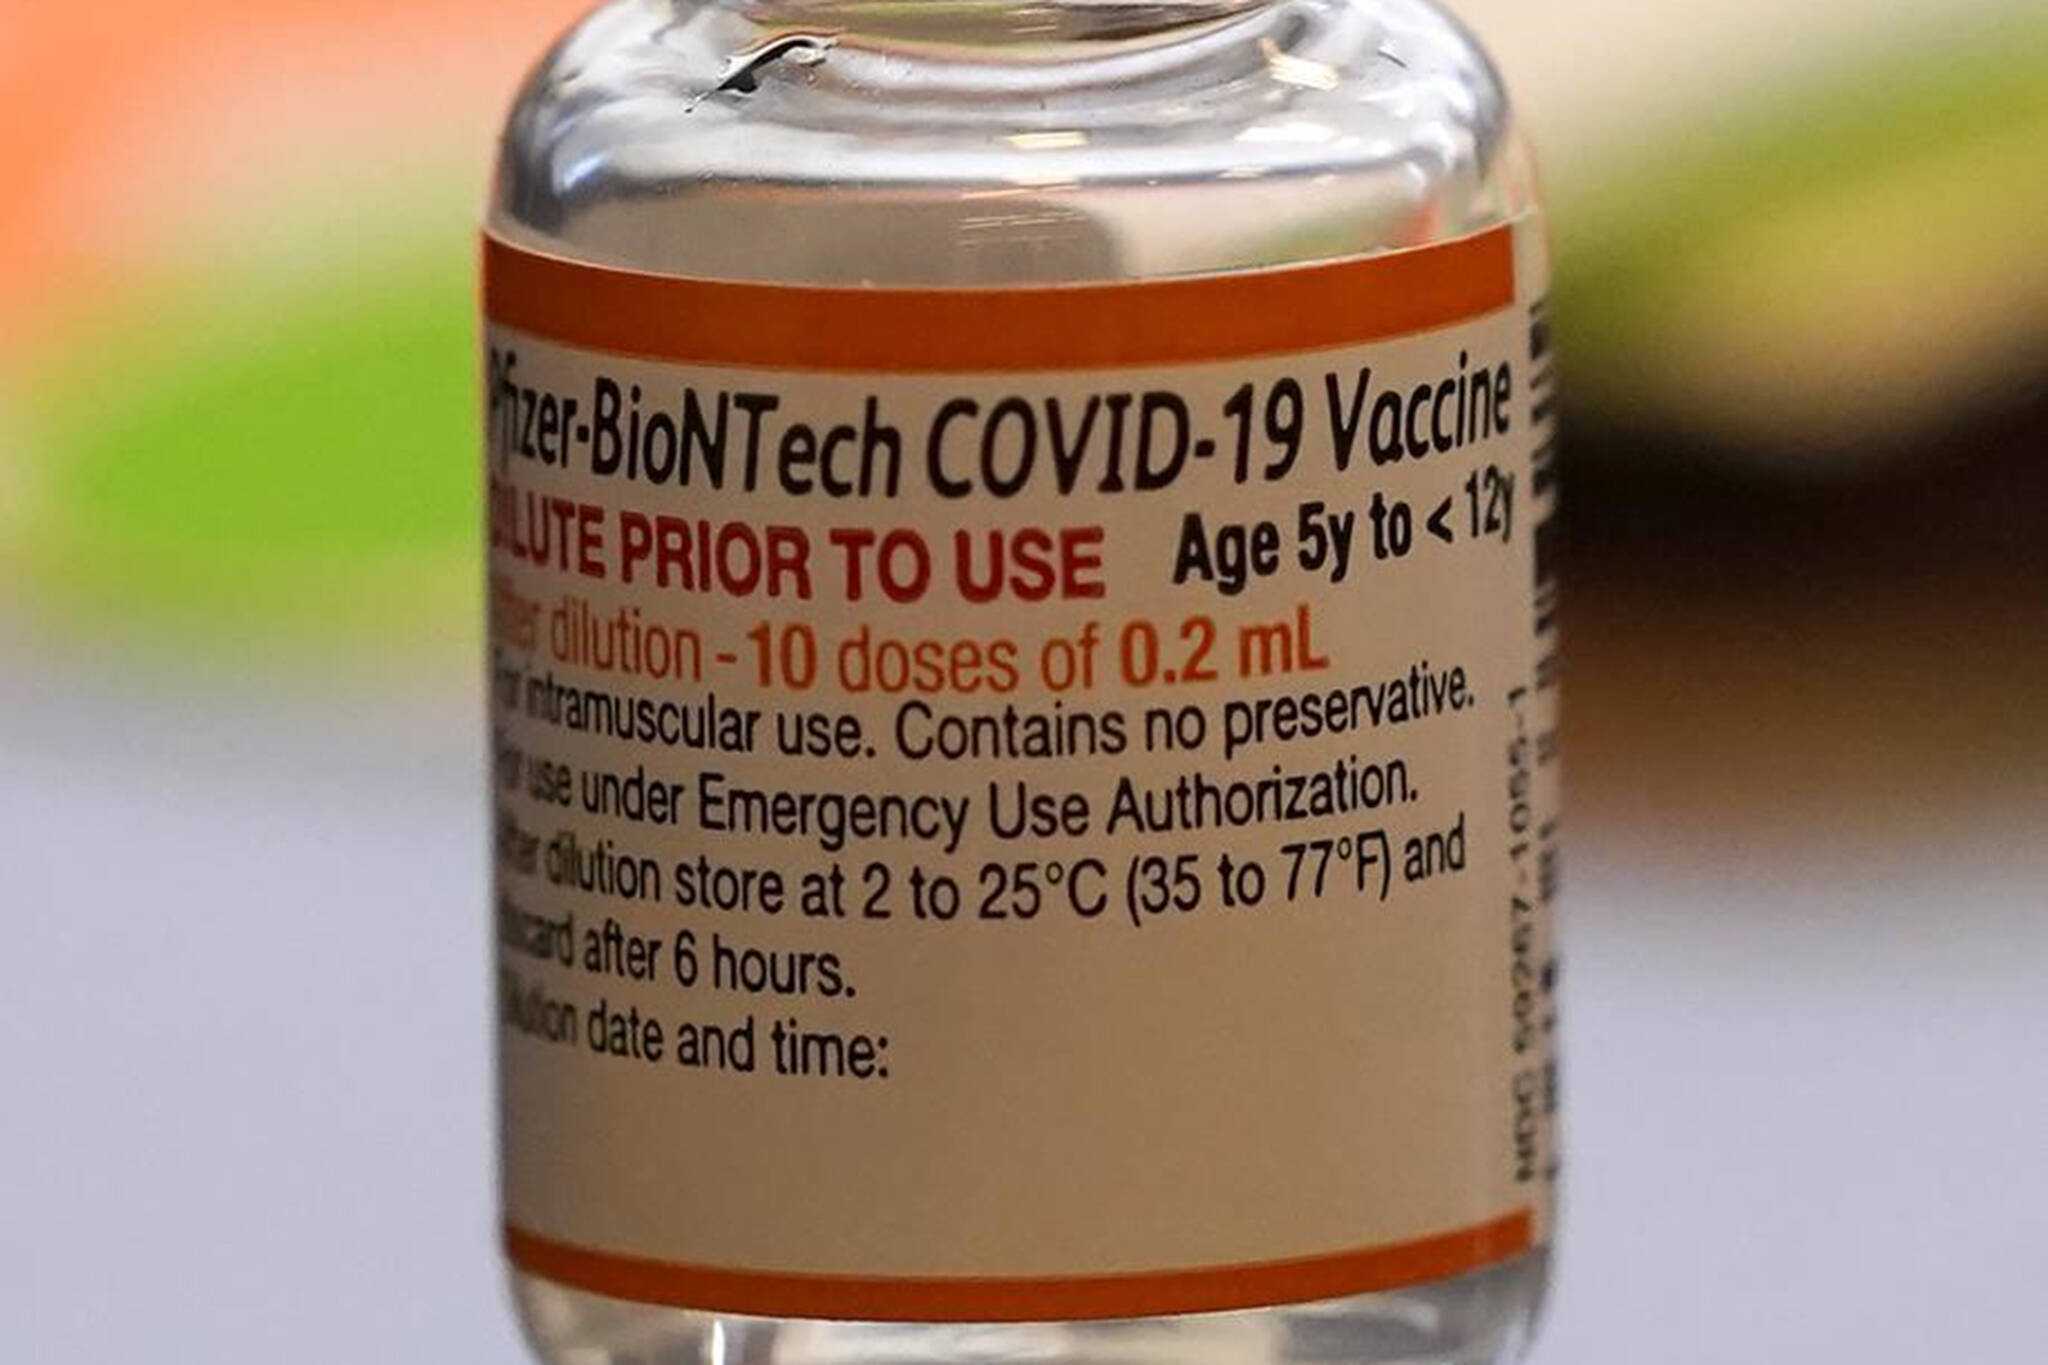 The Pfizer-BioNTech COVID-19 vaccine for children five to 12 years sits ready for use at a vaccination site in Fort Worth, Texas, Thursday, Nov. 11, 2021. (AP Photo/LM Otero)